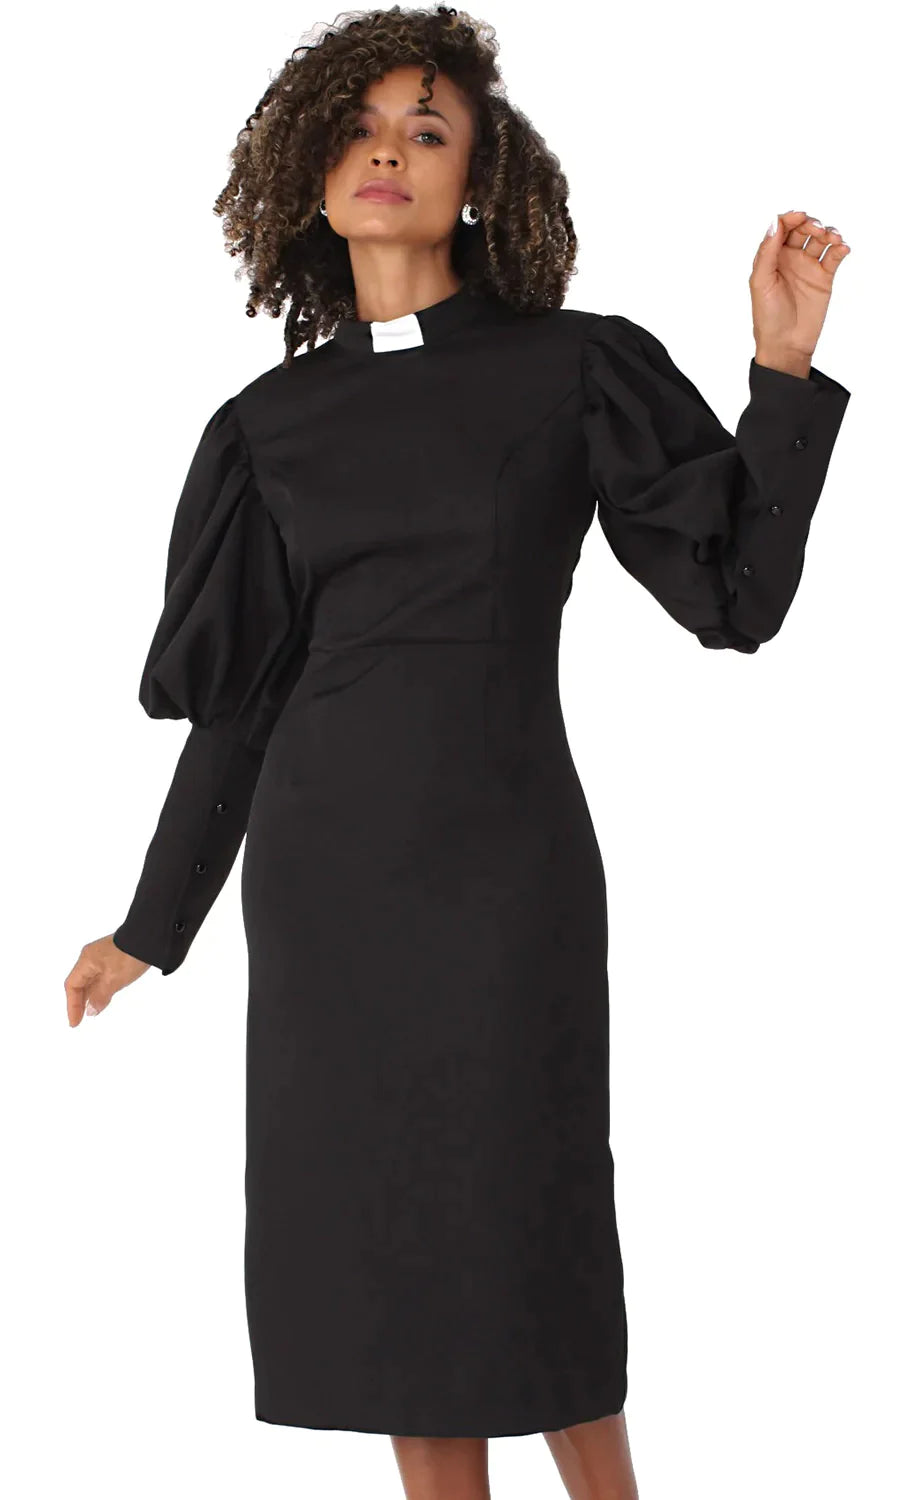 Tally Taylor Usher Dress 4813C-Black - Church Suits For Less